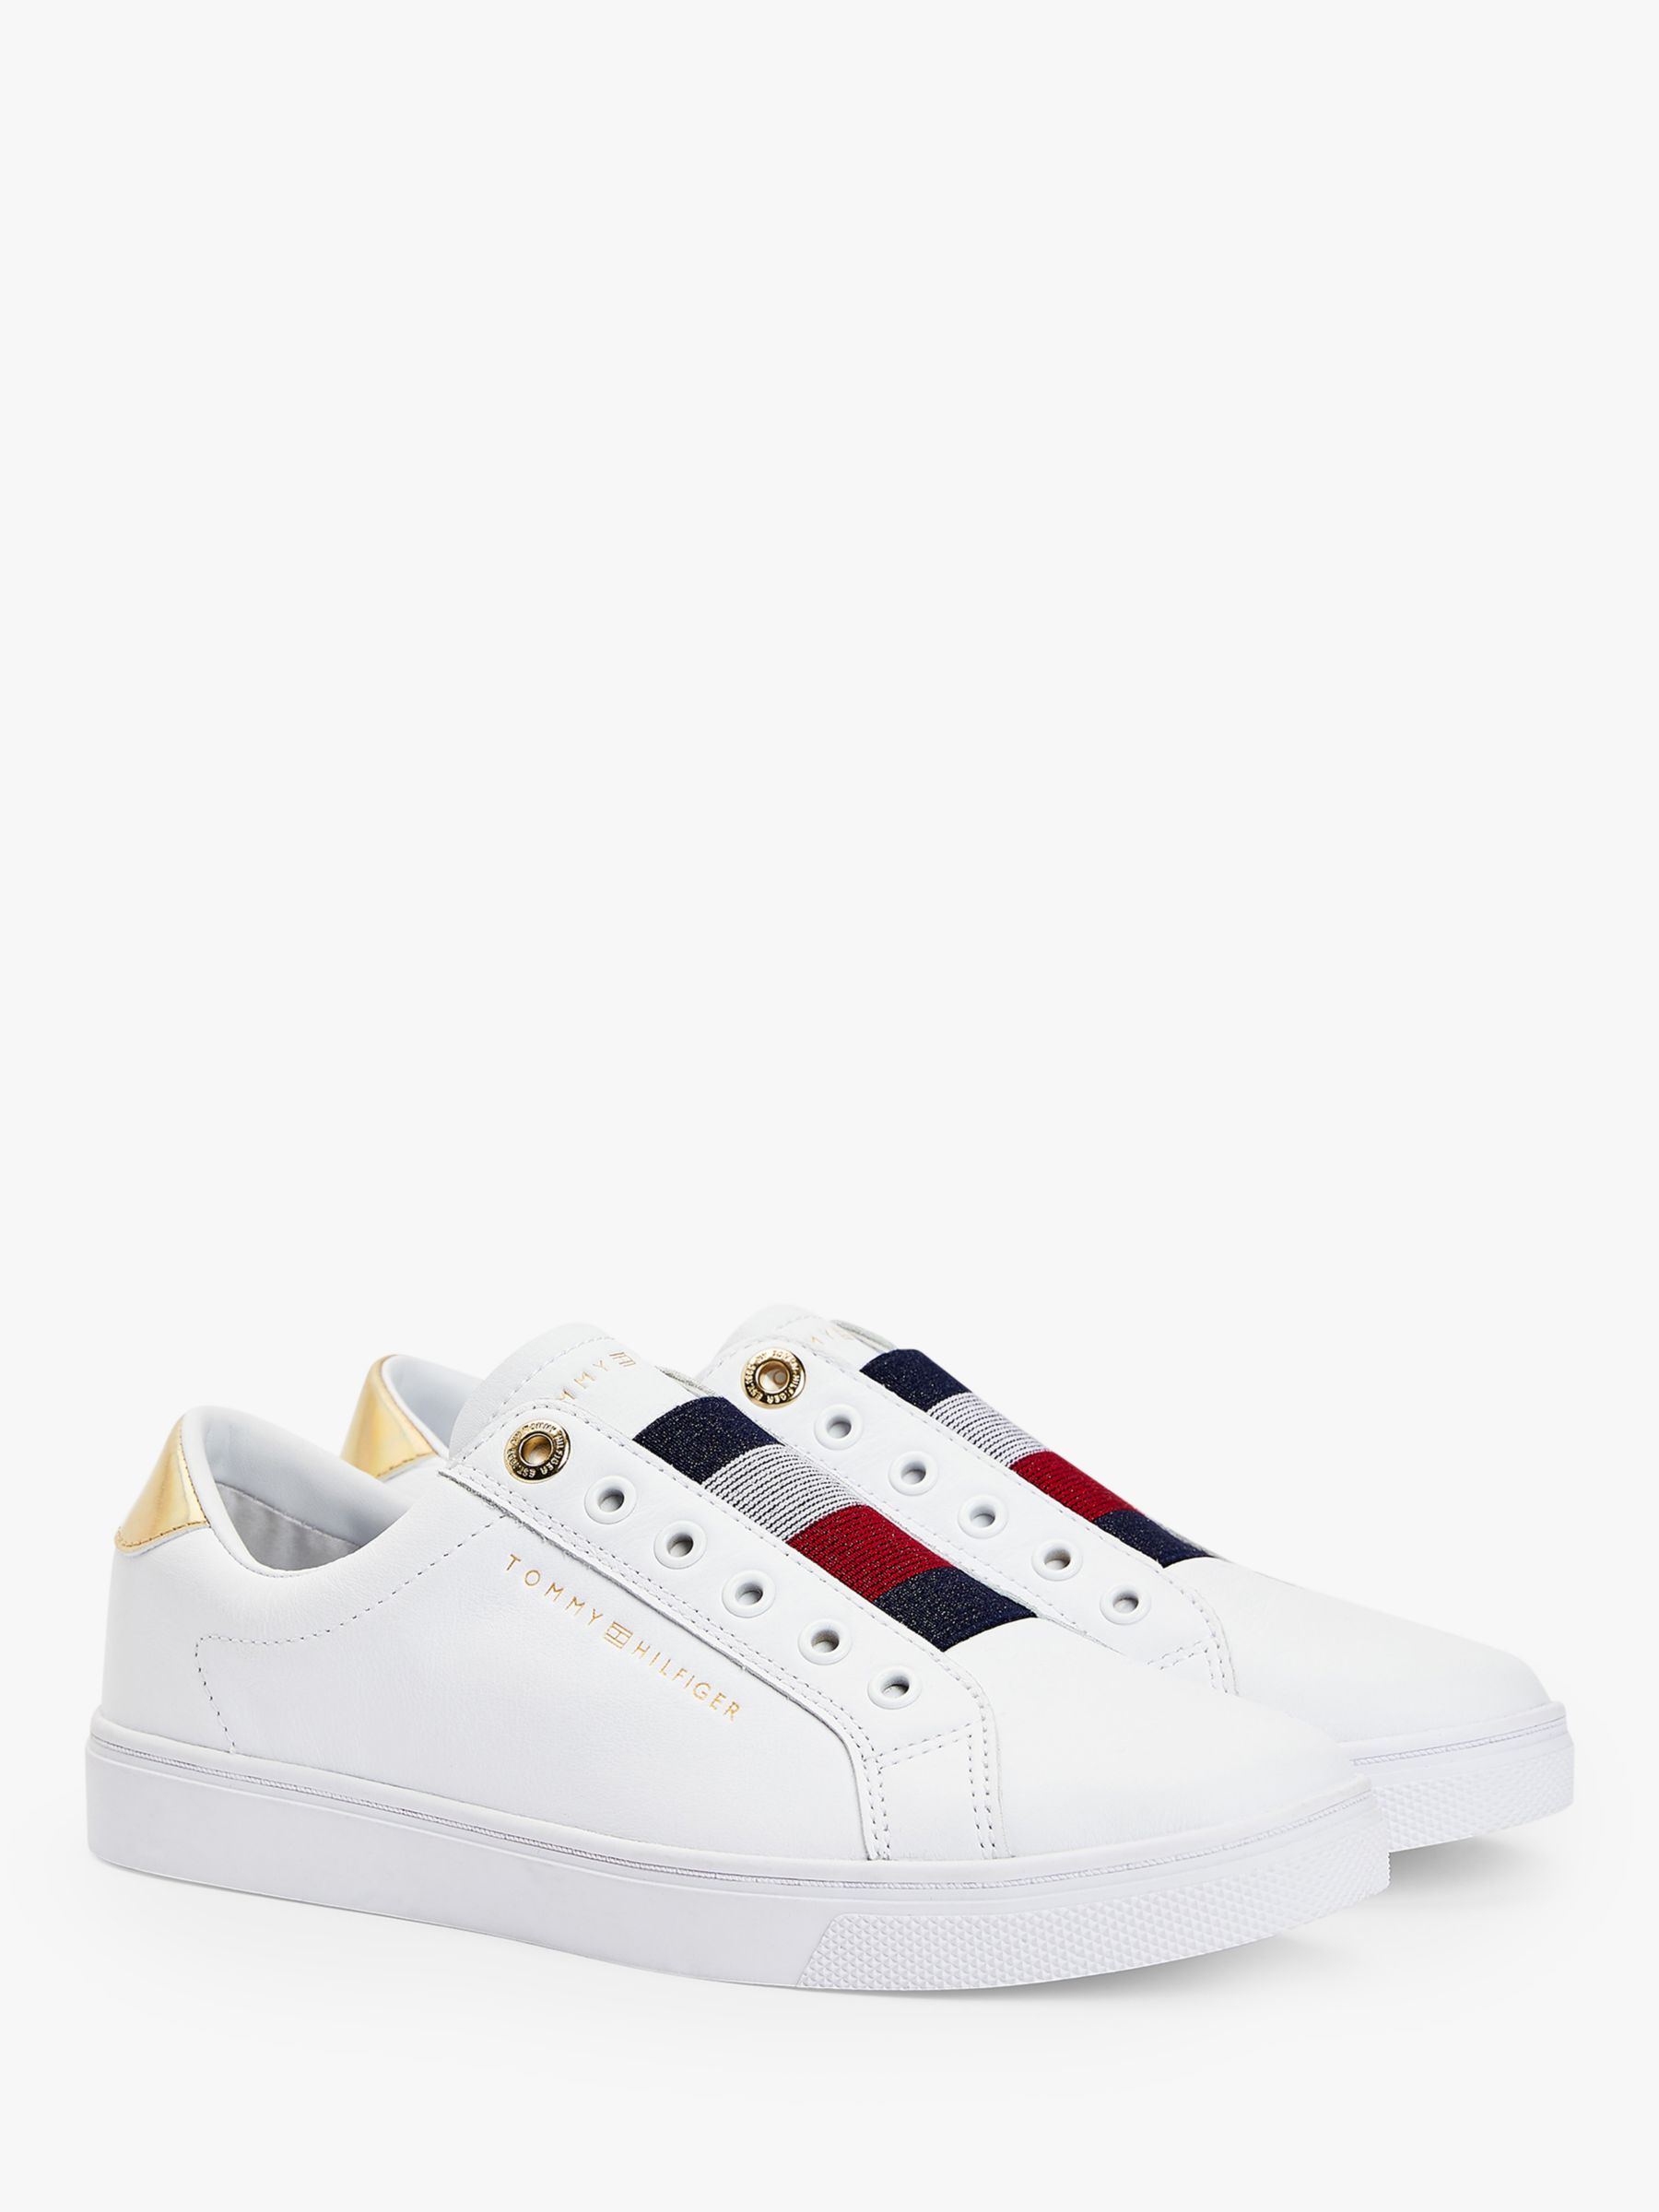 Tommy Hilfiger Elastic Leather Slip-On Trainers, White at John Lewis ...